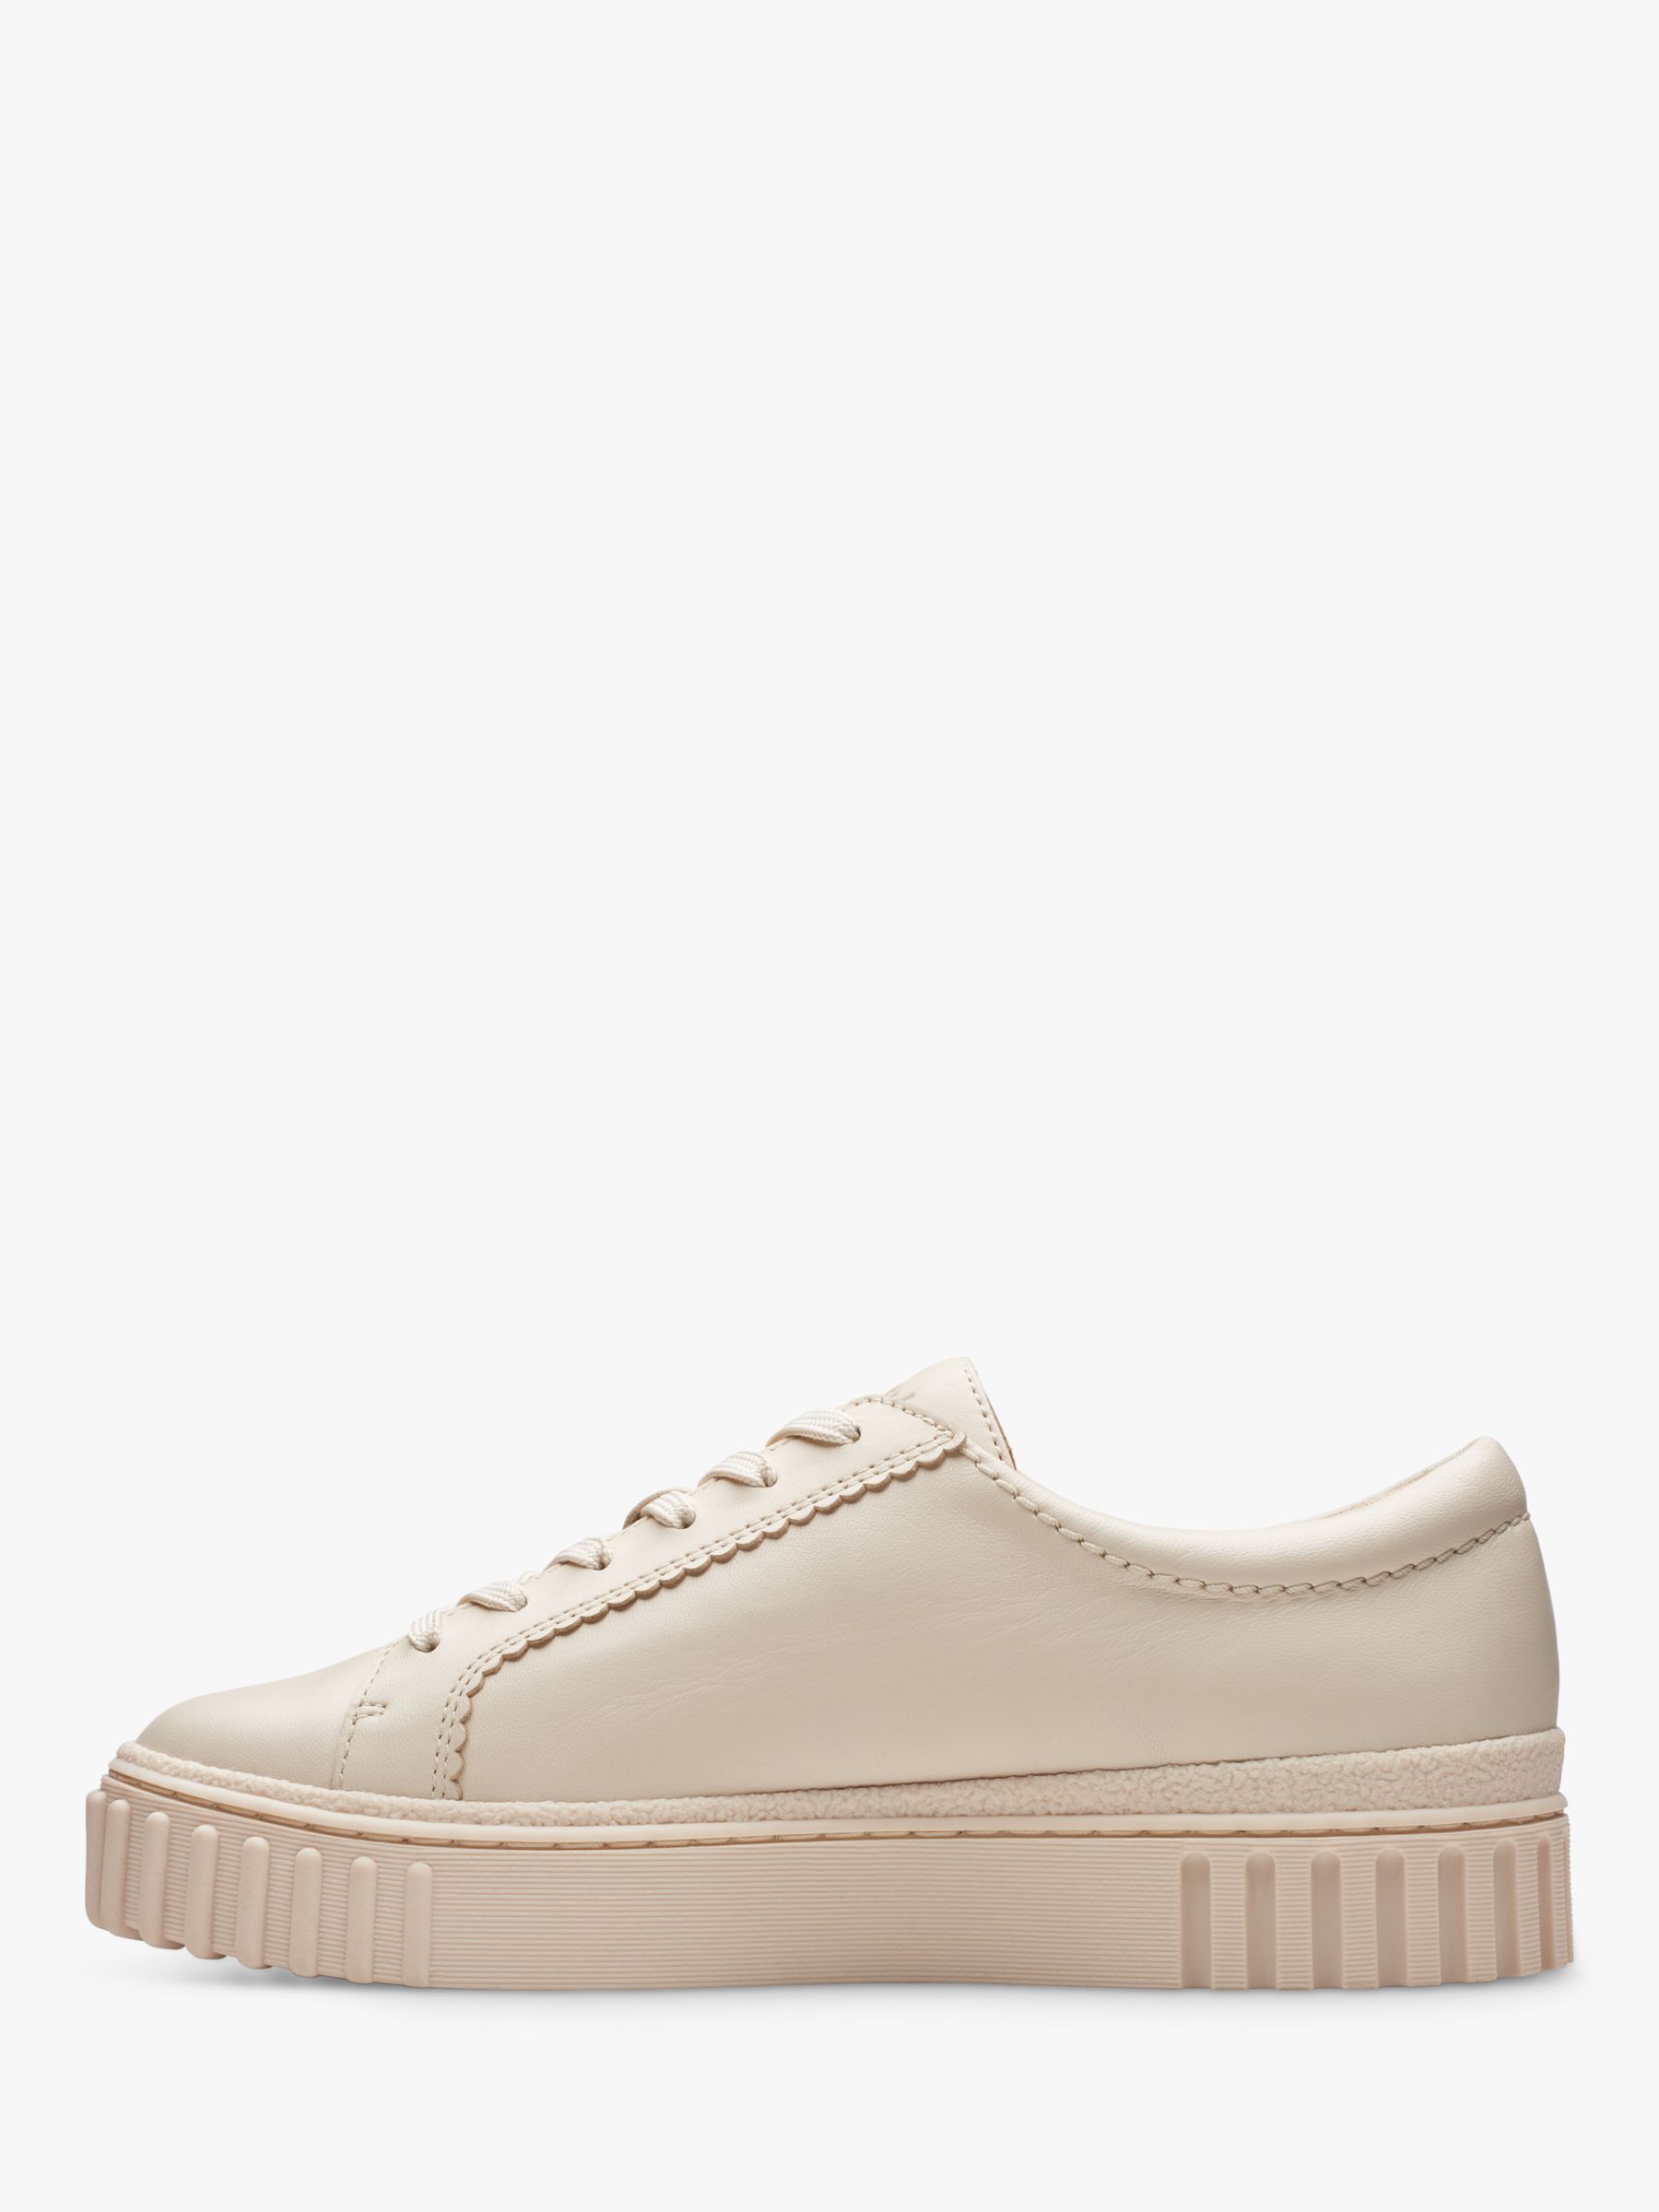 Buy Clarks Mayhill Walk Leather Flatform Trainers Online at johnlewis.com